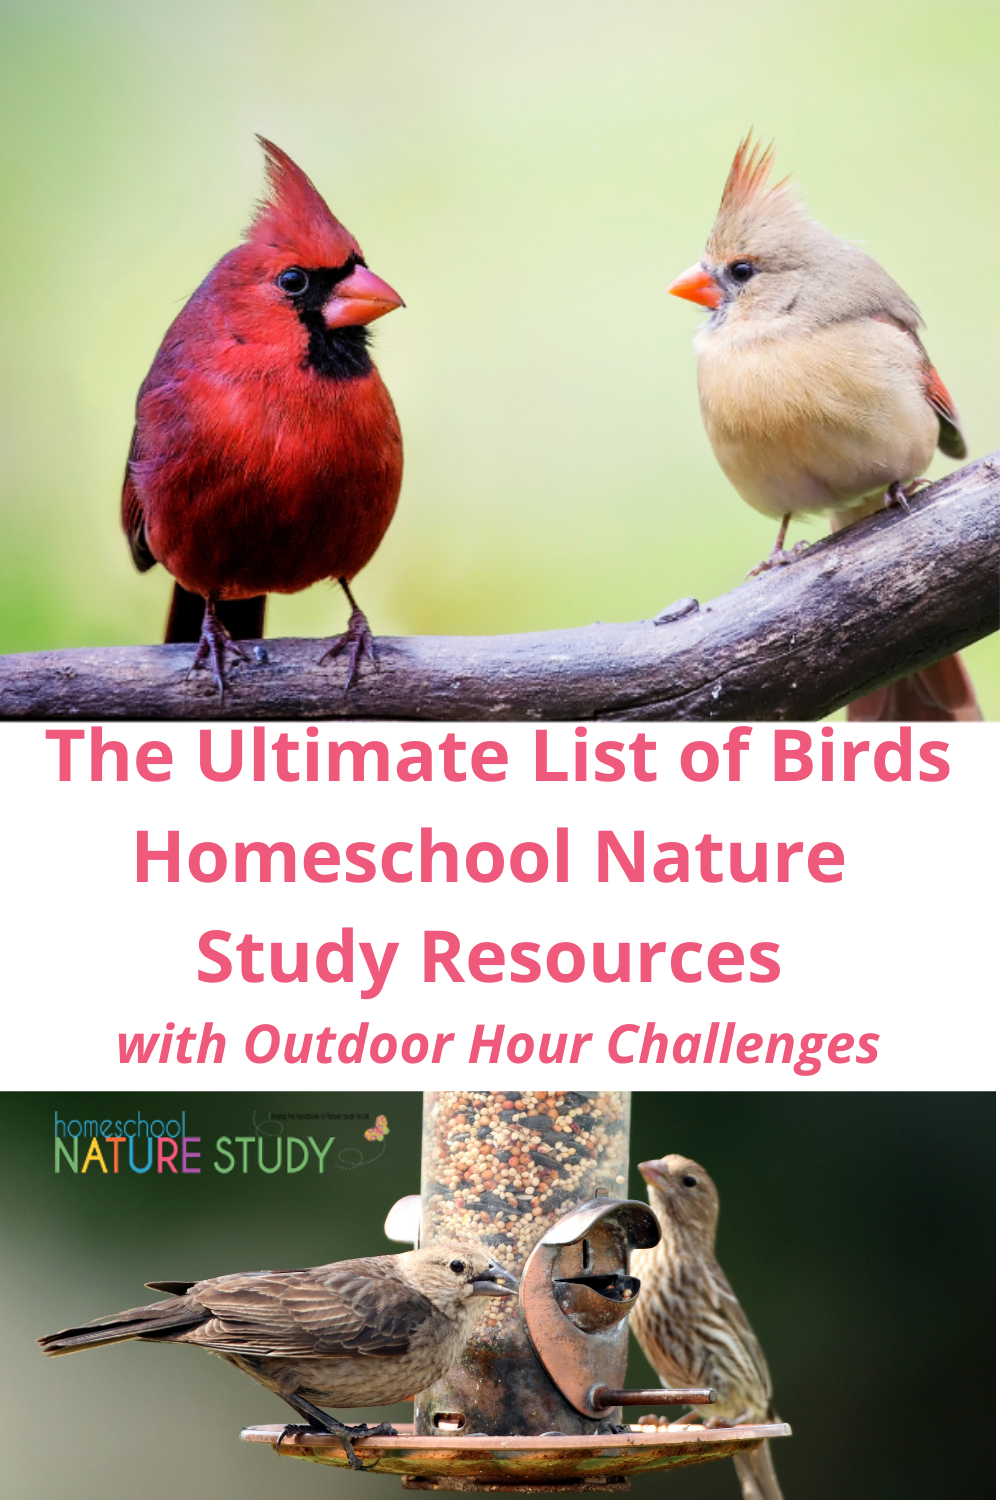 It is such a delight to study and learn about these beautiful creatures! You can enjoy a simple birds homeschool nature study with these resources.